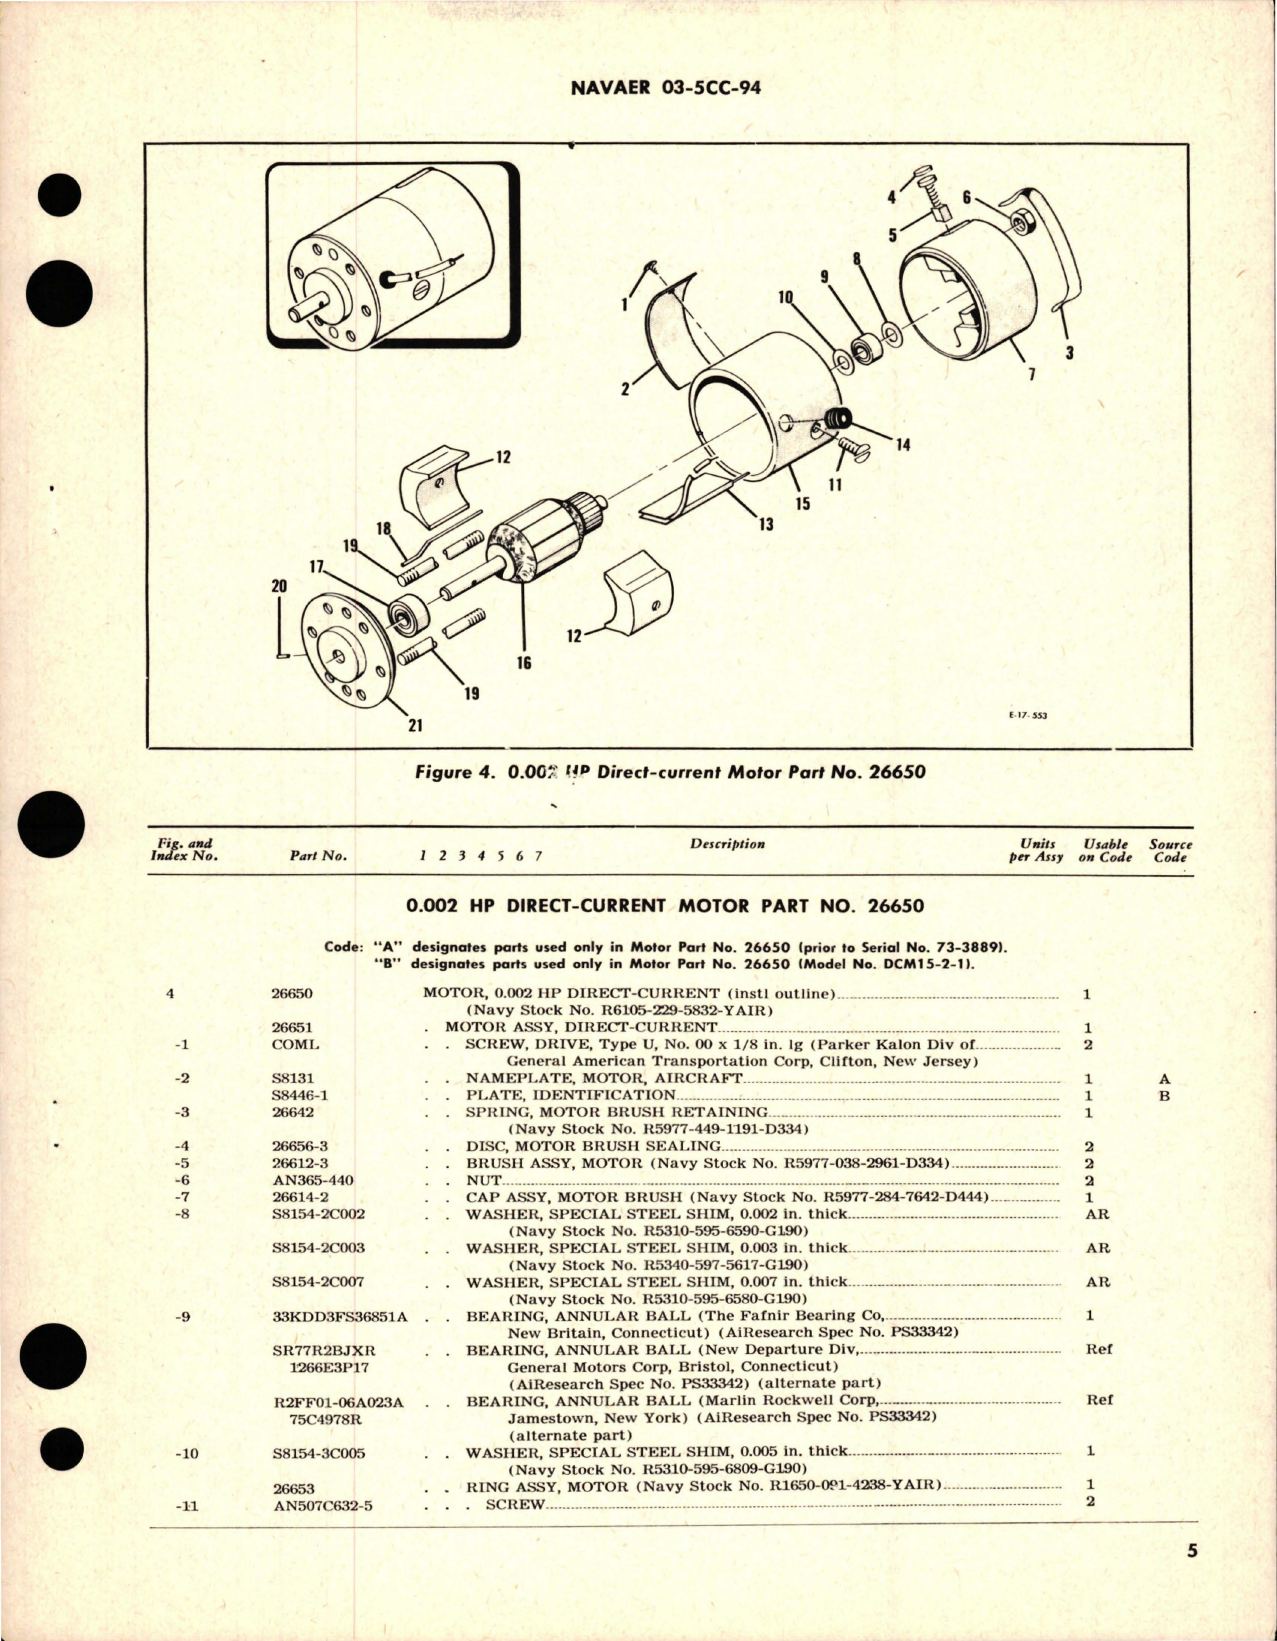 Sample page 5 from AirCorps Library document: Overhaul Instructions with Parts Breakdown for Direct-Current Motor - Part 26650 - Model DCM15-2-1